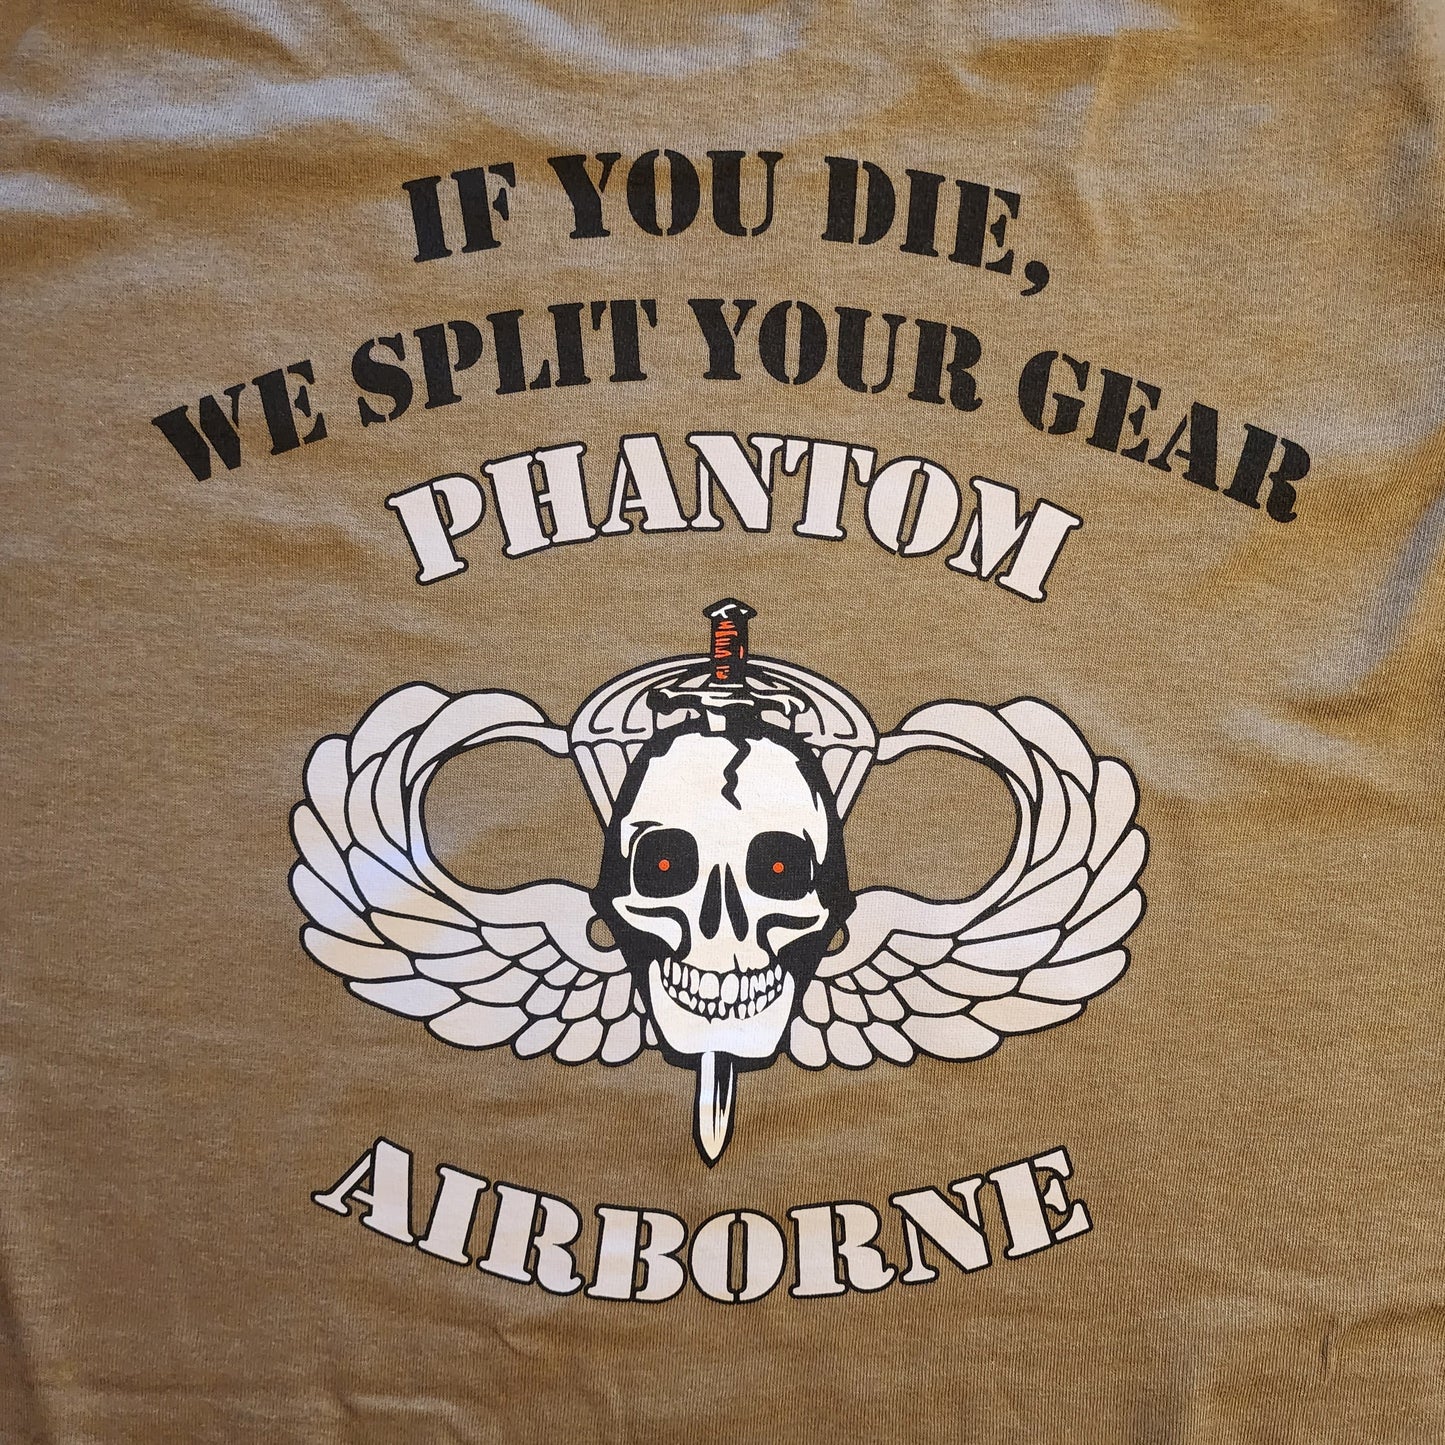 "If You Die, We Split Your Gear" T-Shirt